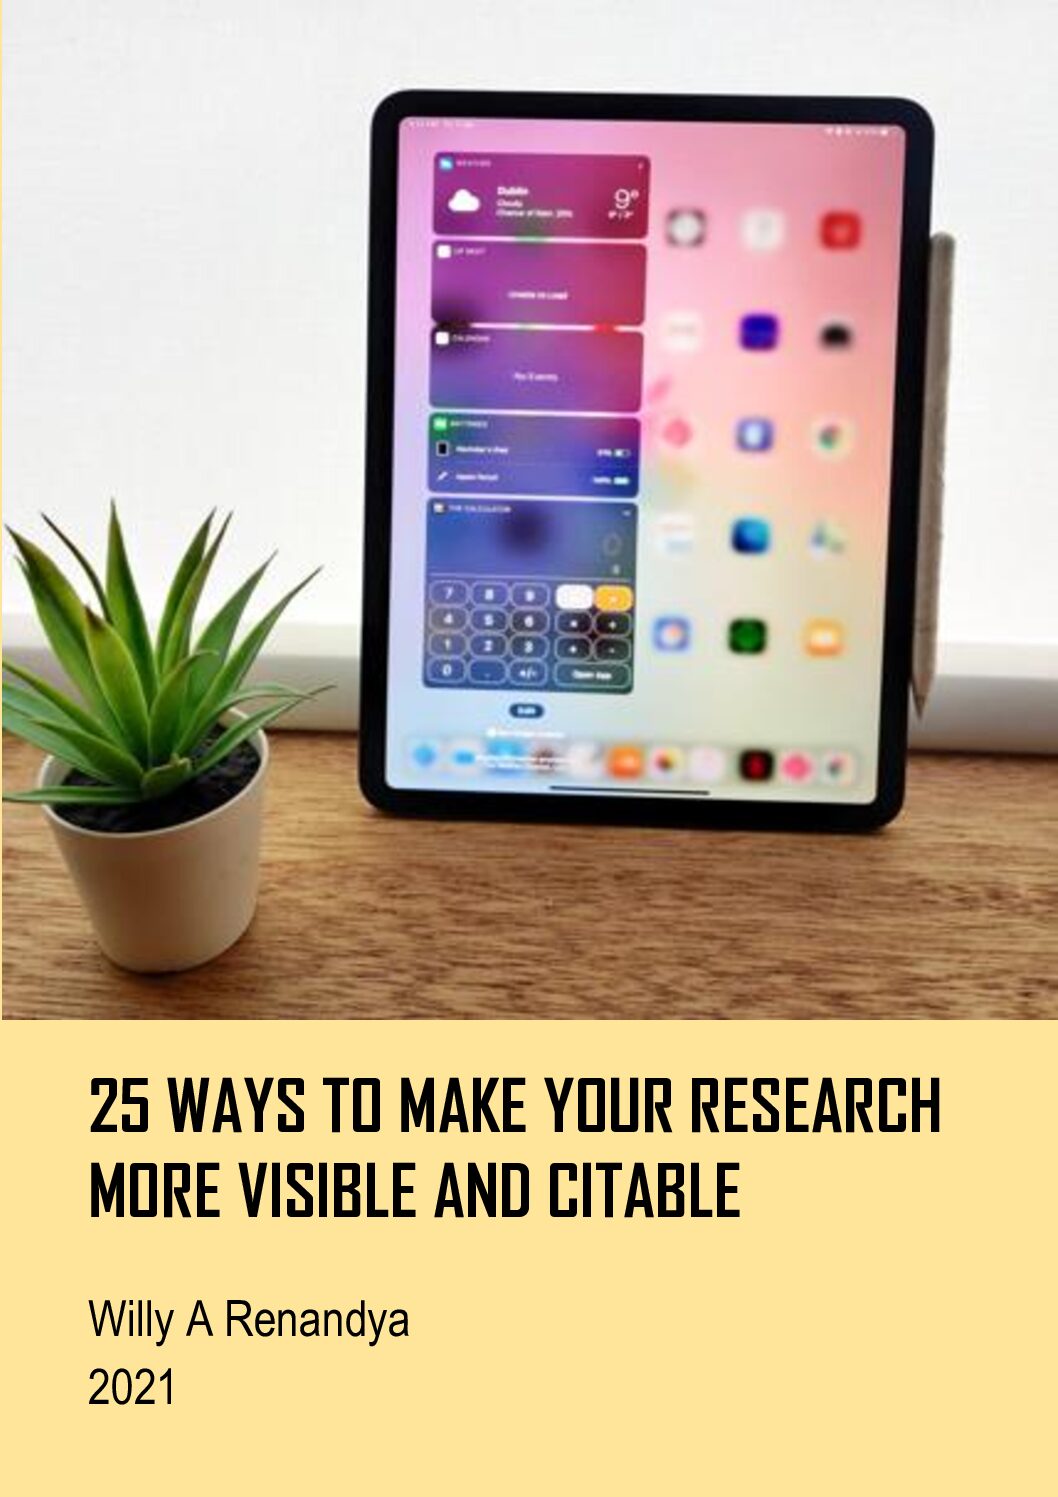 25 ways to make your research more visible and citable